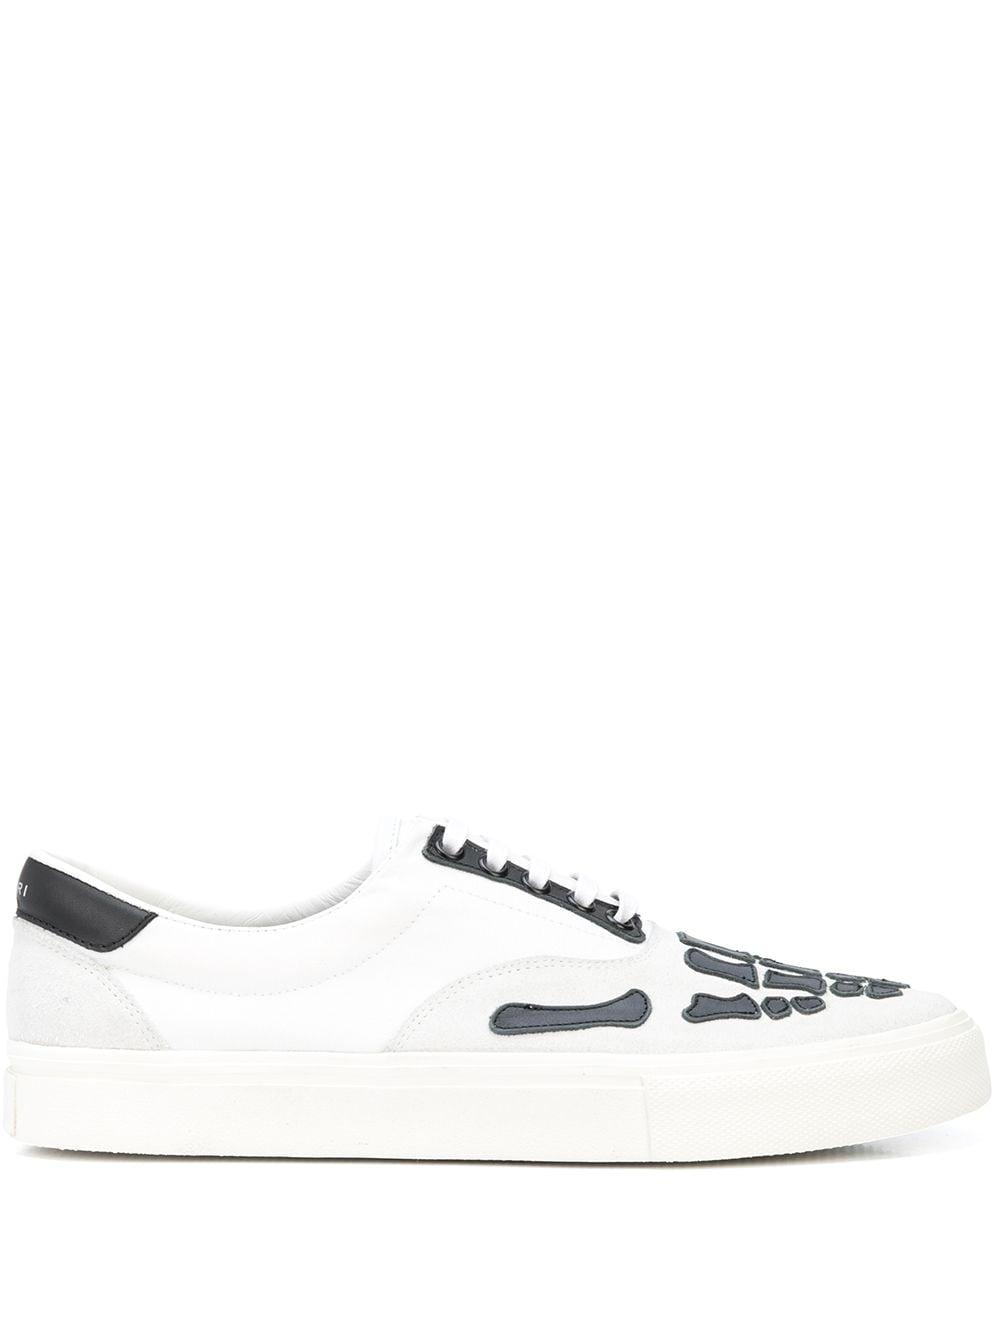 Amiri Leather Skeleton Print Low-top Sneakers in White for Men - Lyst